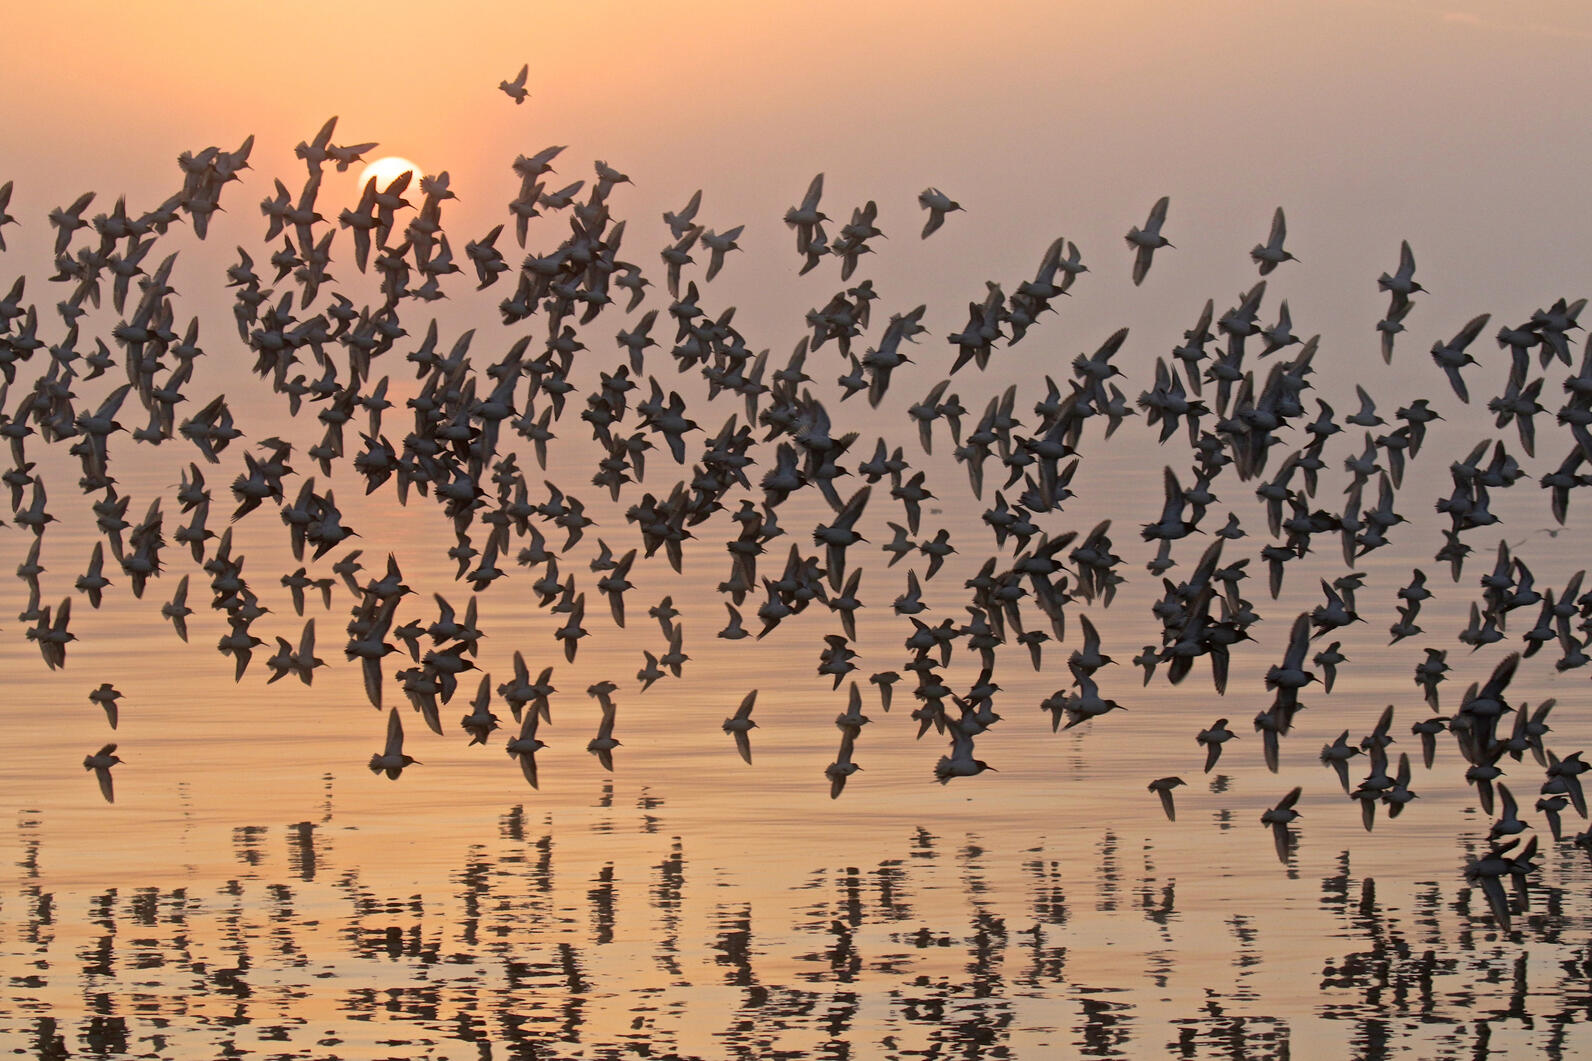 A mesmerizing flock of Western Sandpipers and Dunlins flying over rippling waters.